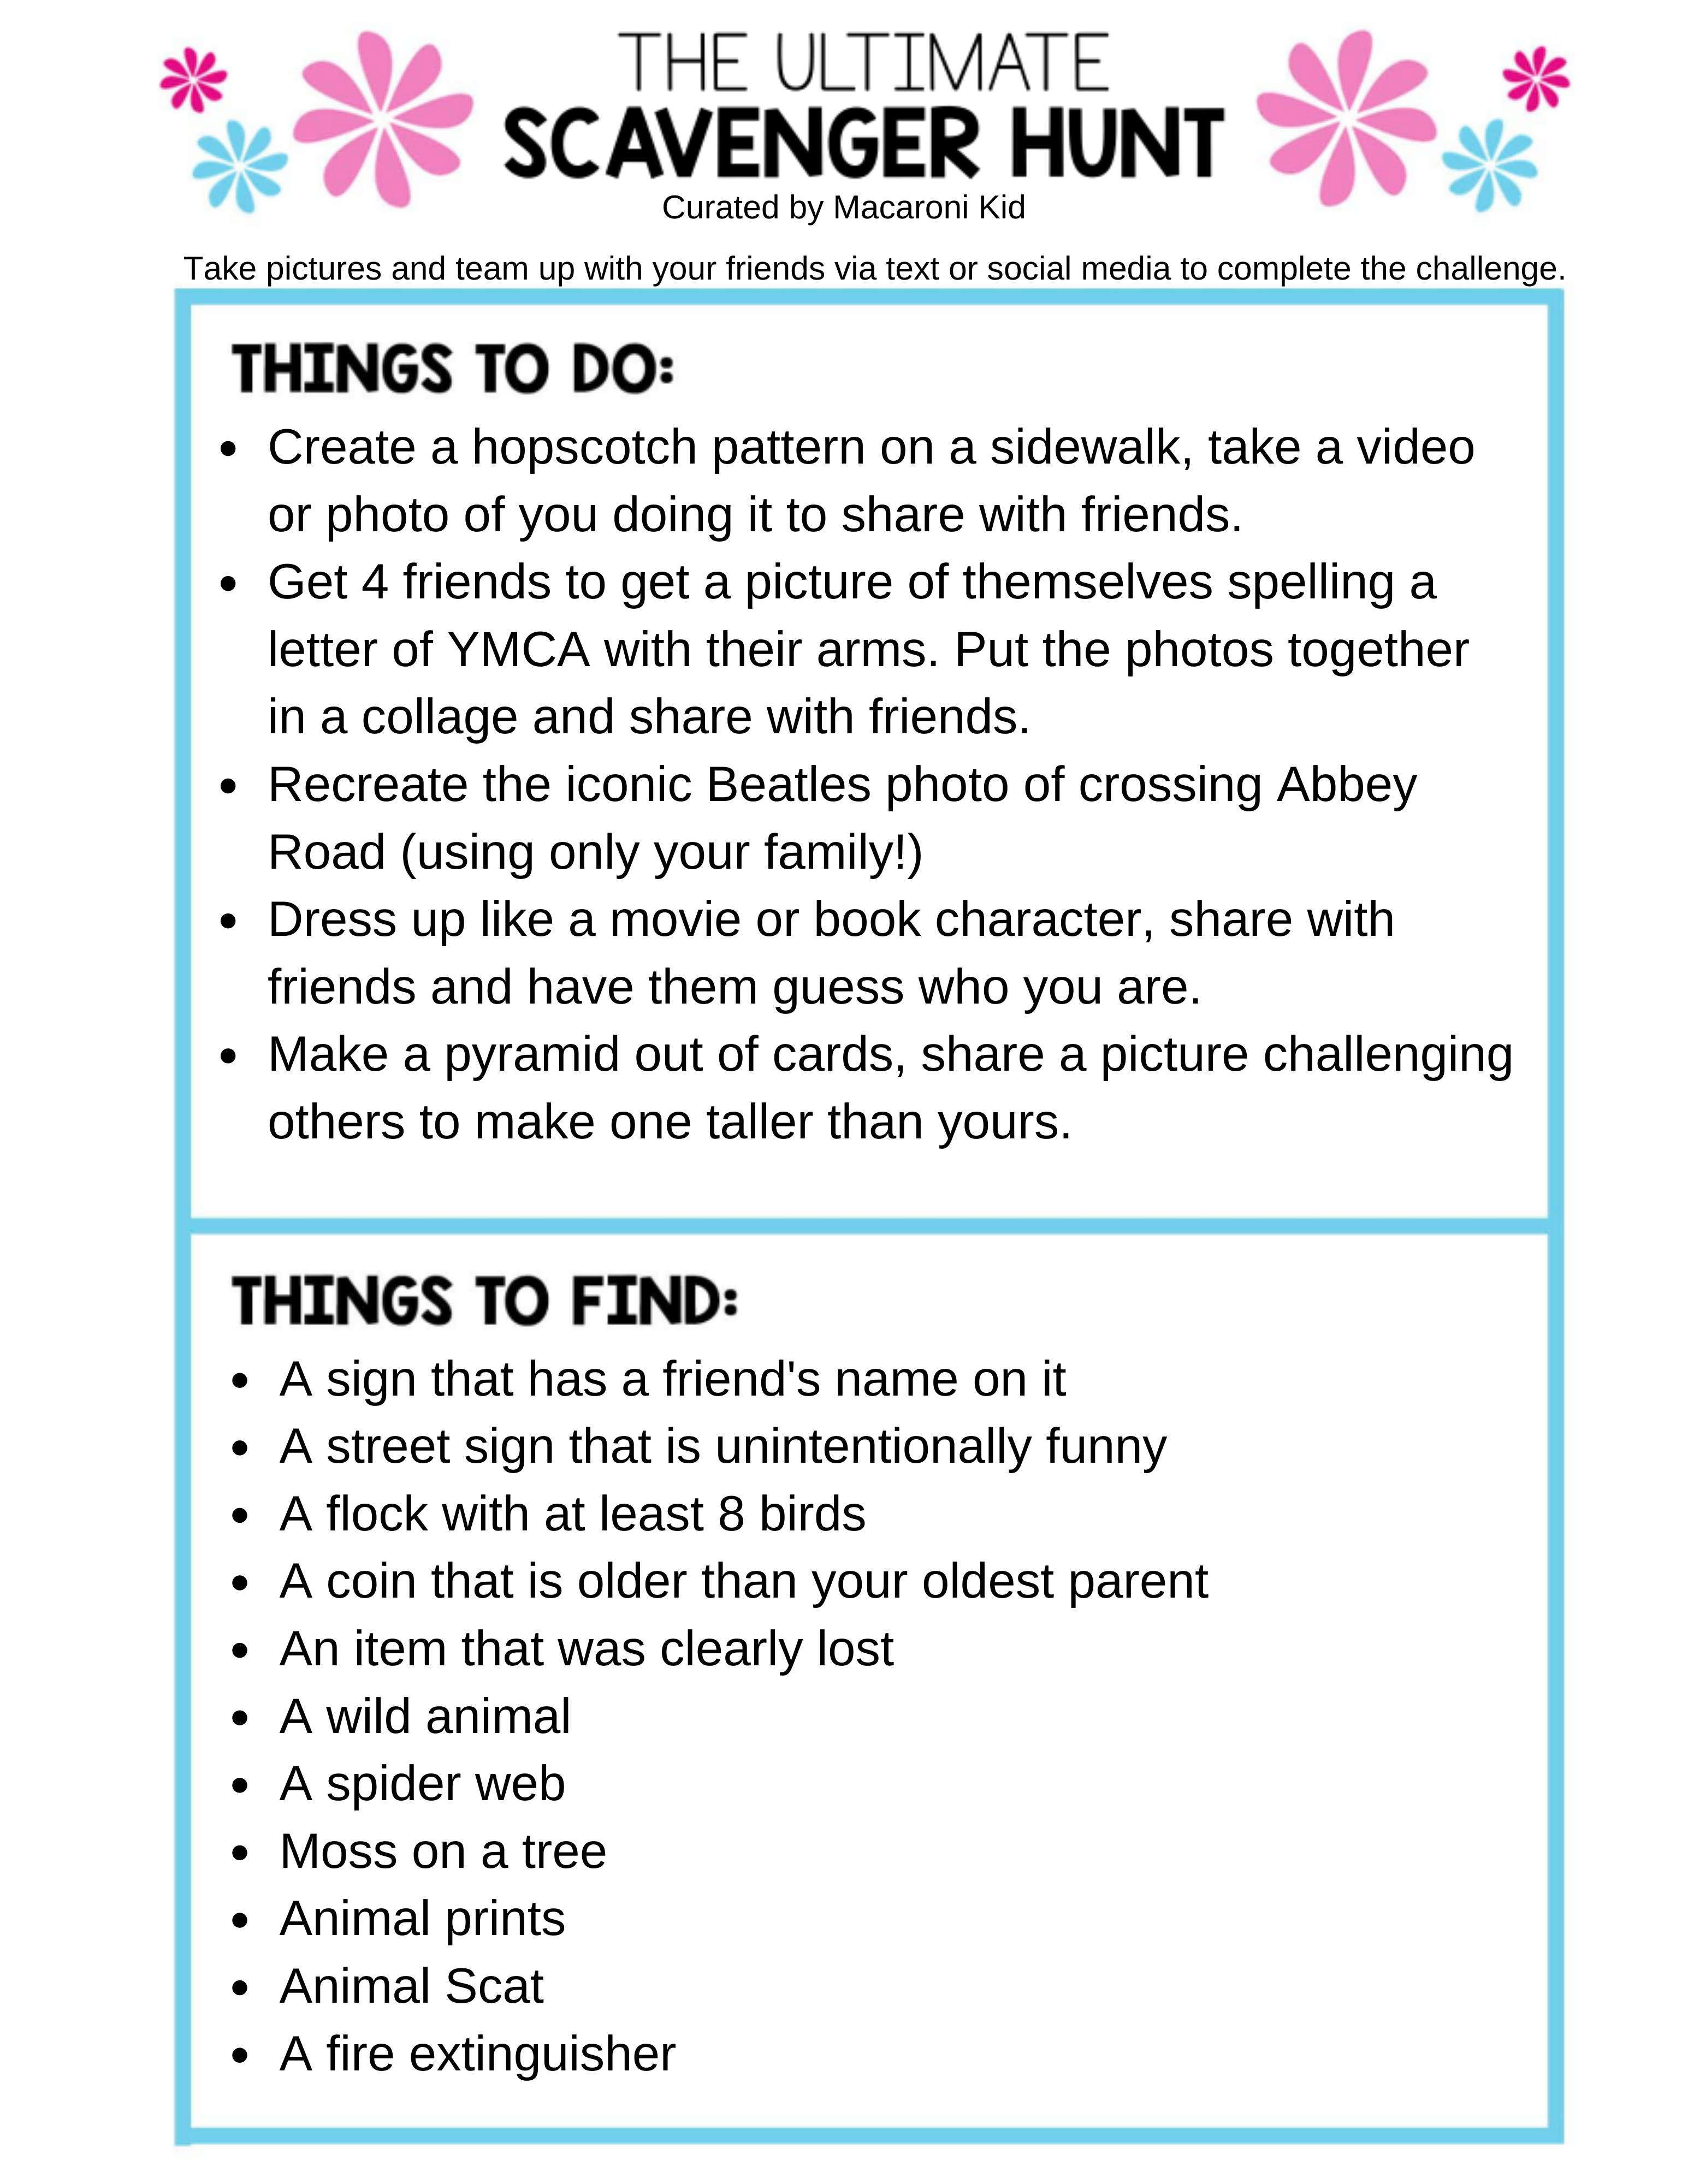 virtual-scavenger-hunt-for-moms-printable-for-a-fun-online-game